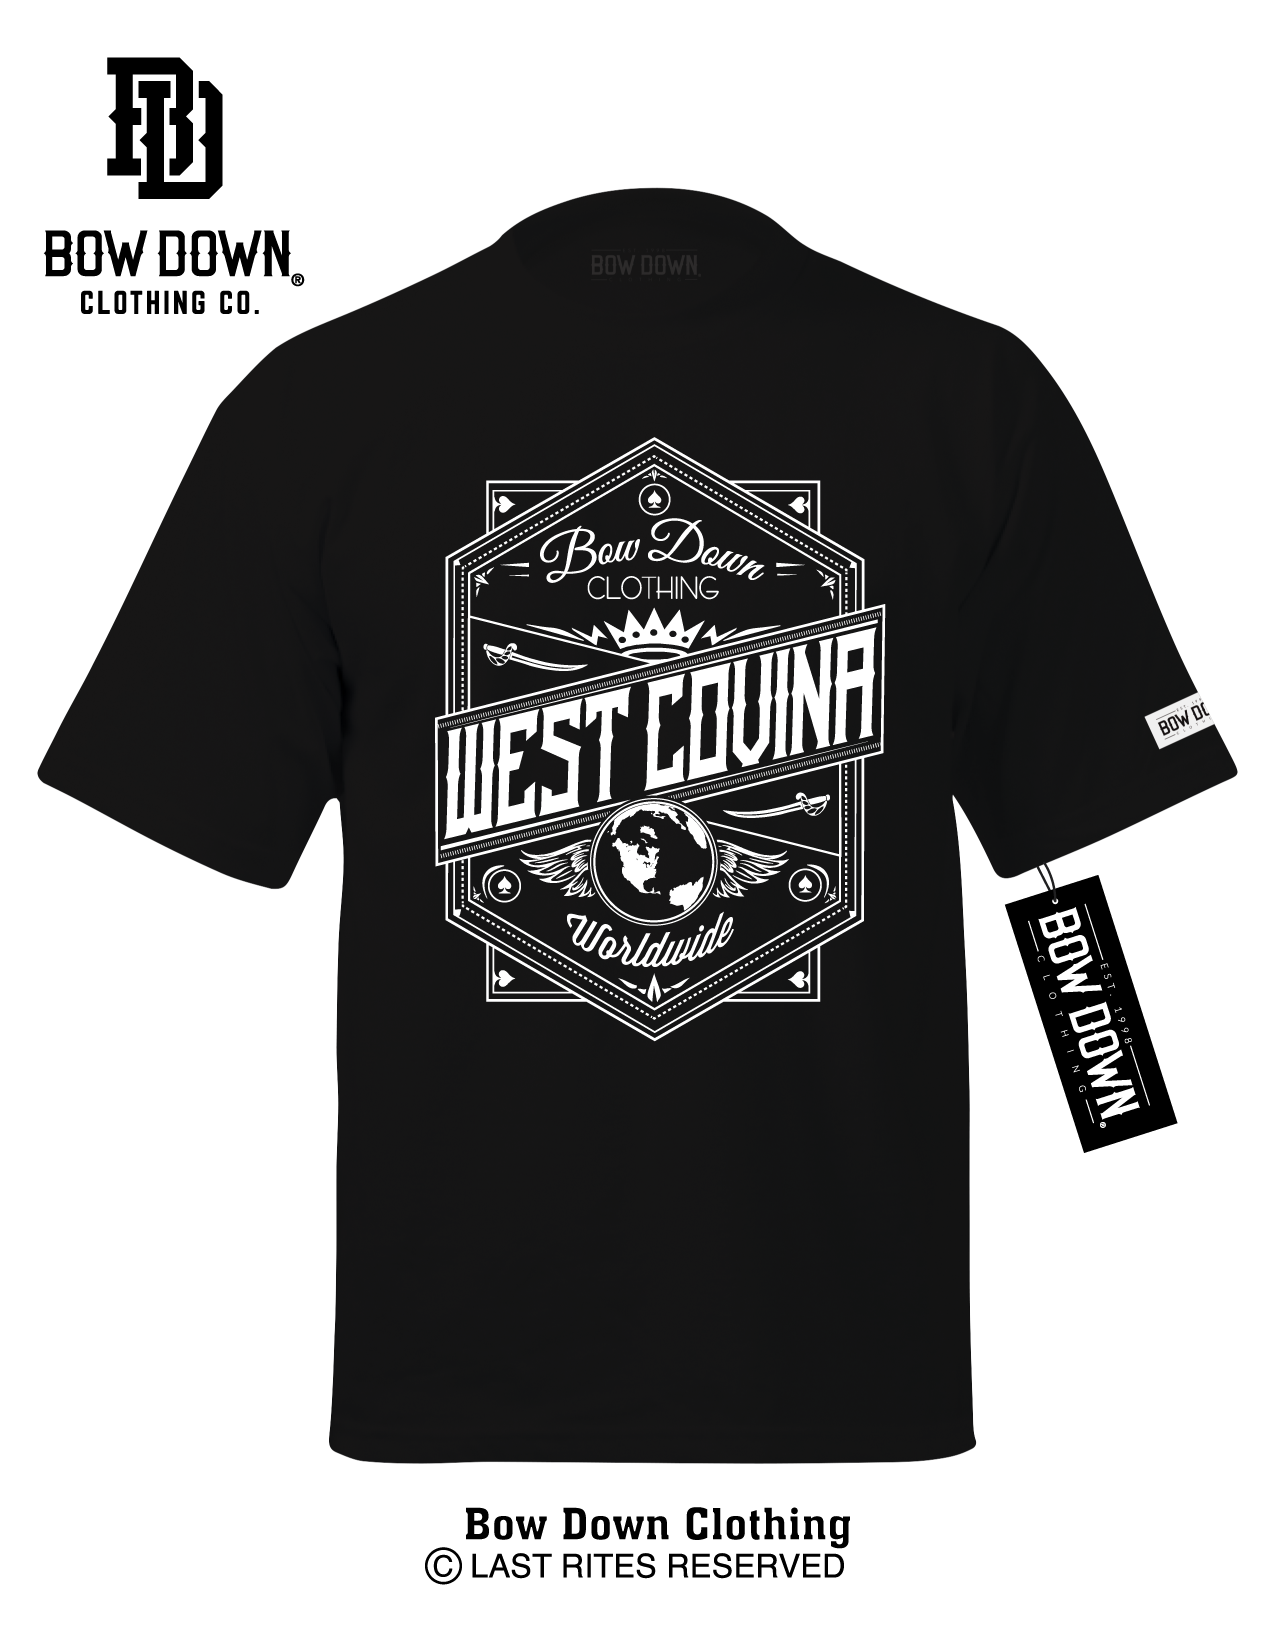 WEST COVINA CROWN